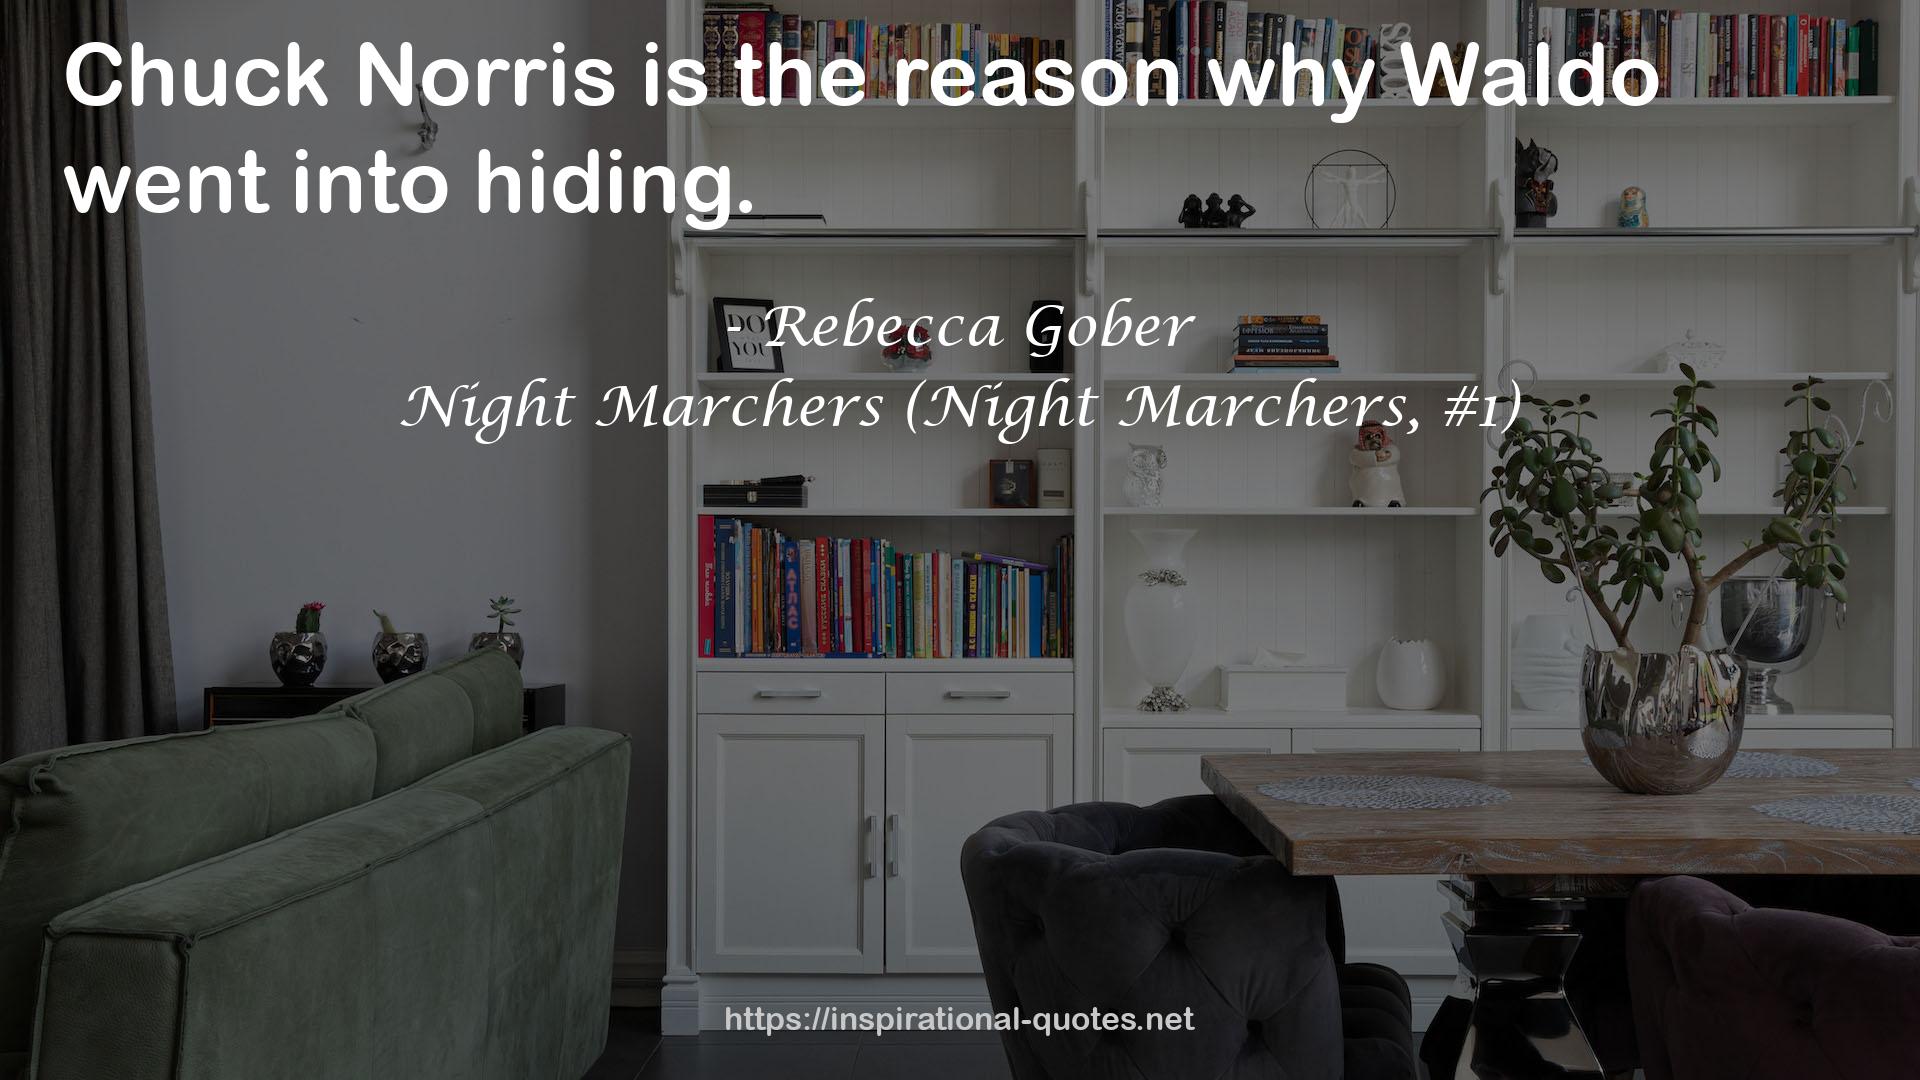 Night Marchers (Night Marchers, #1) QUOTES